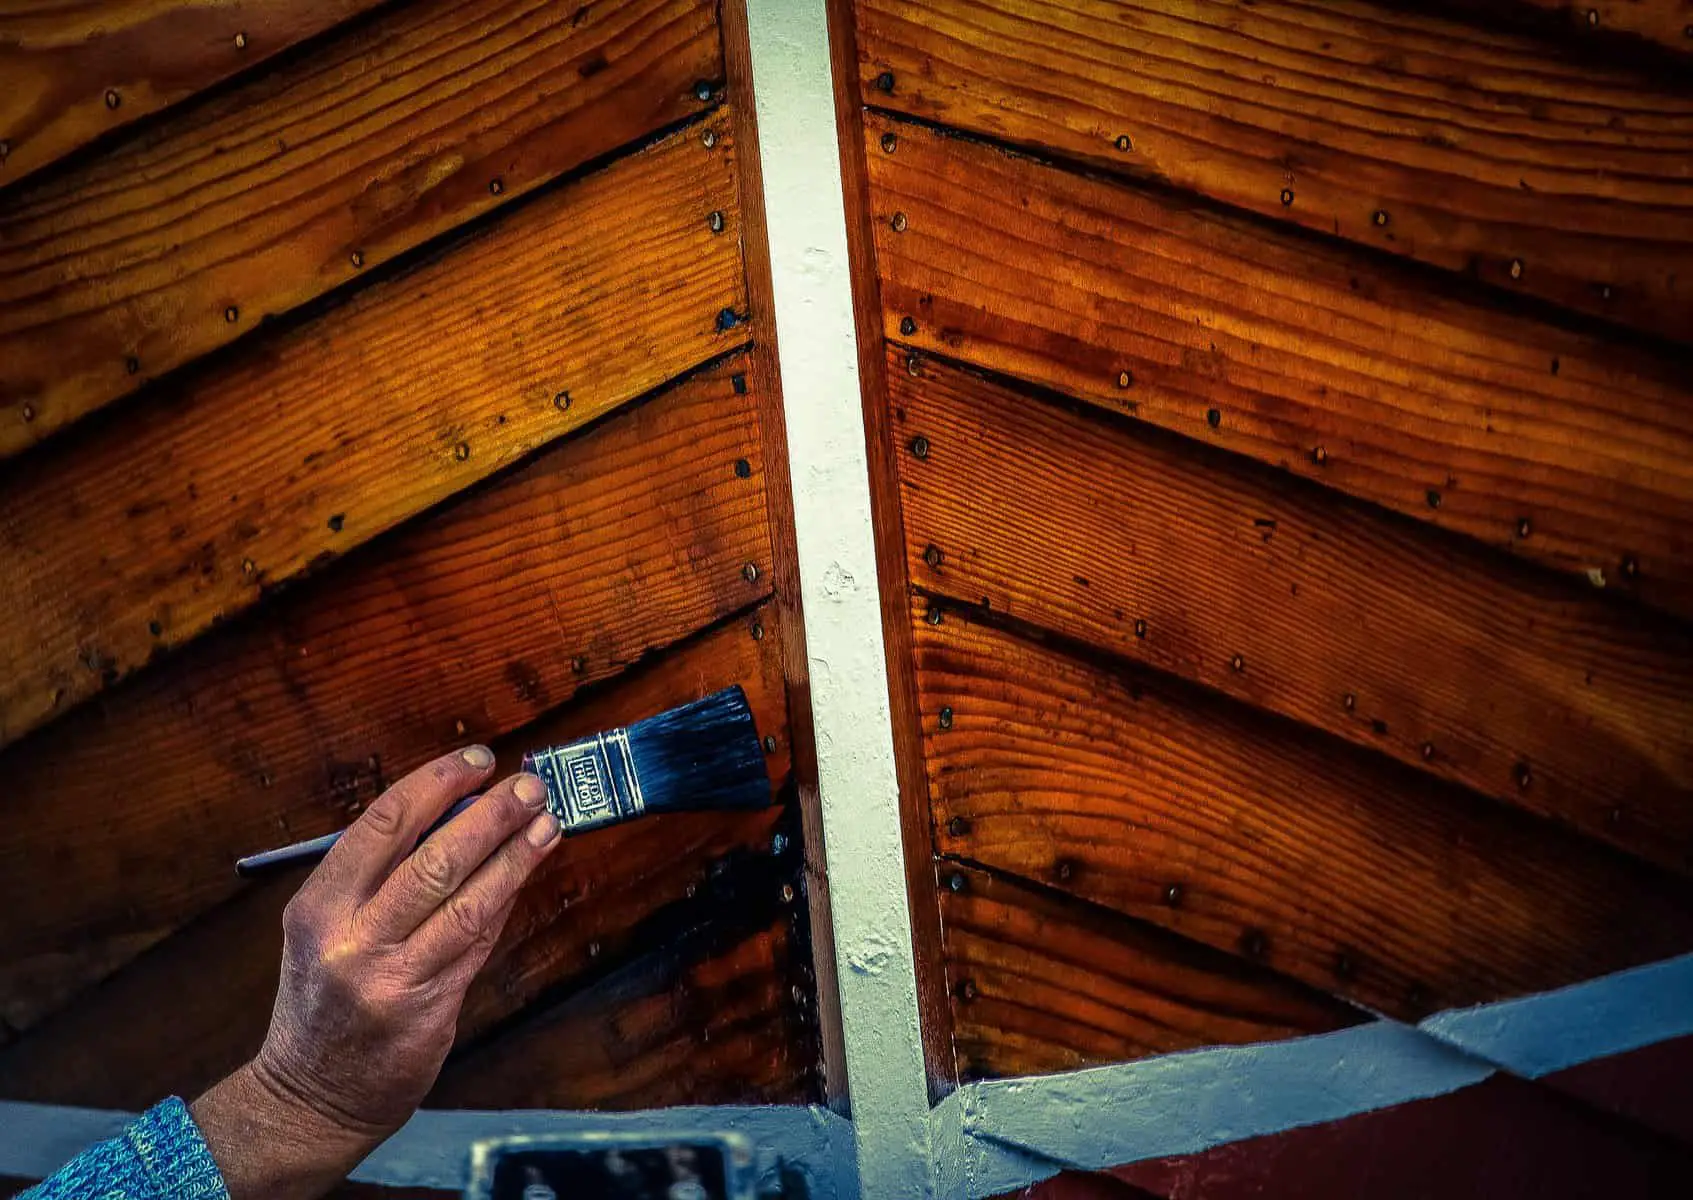 waterproofing a wooden boat hull